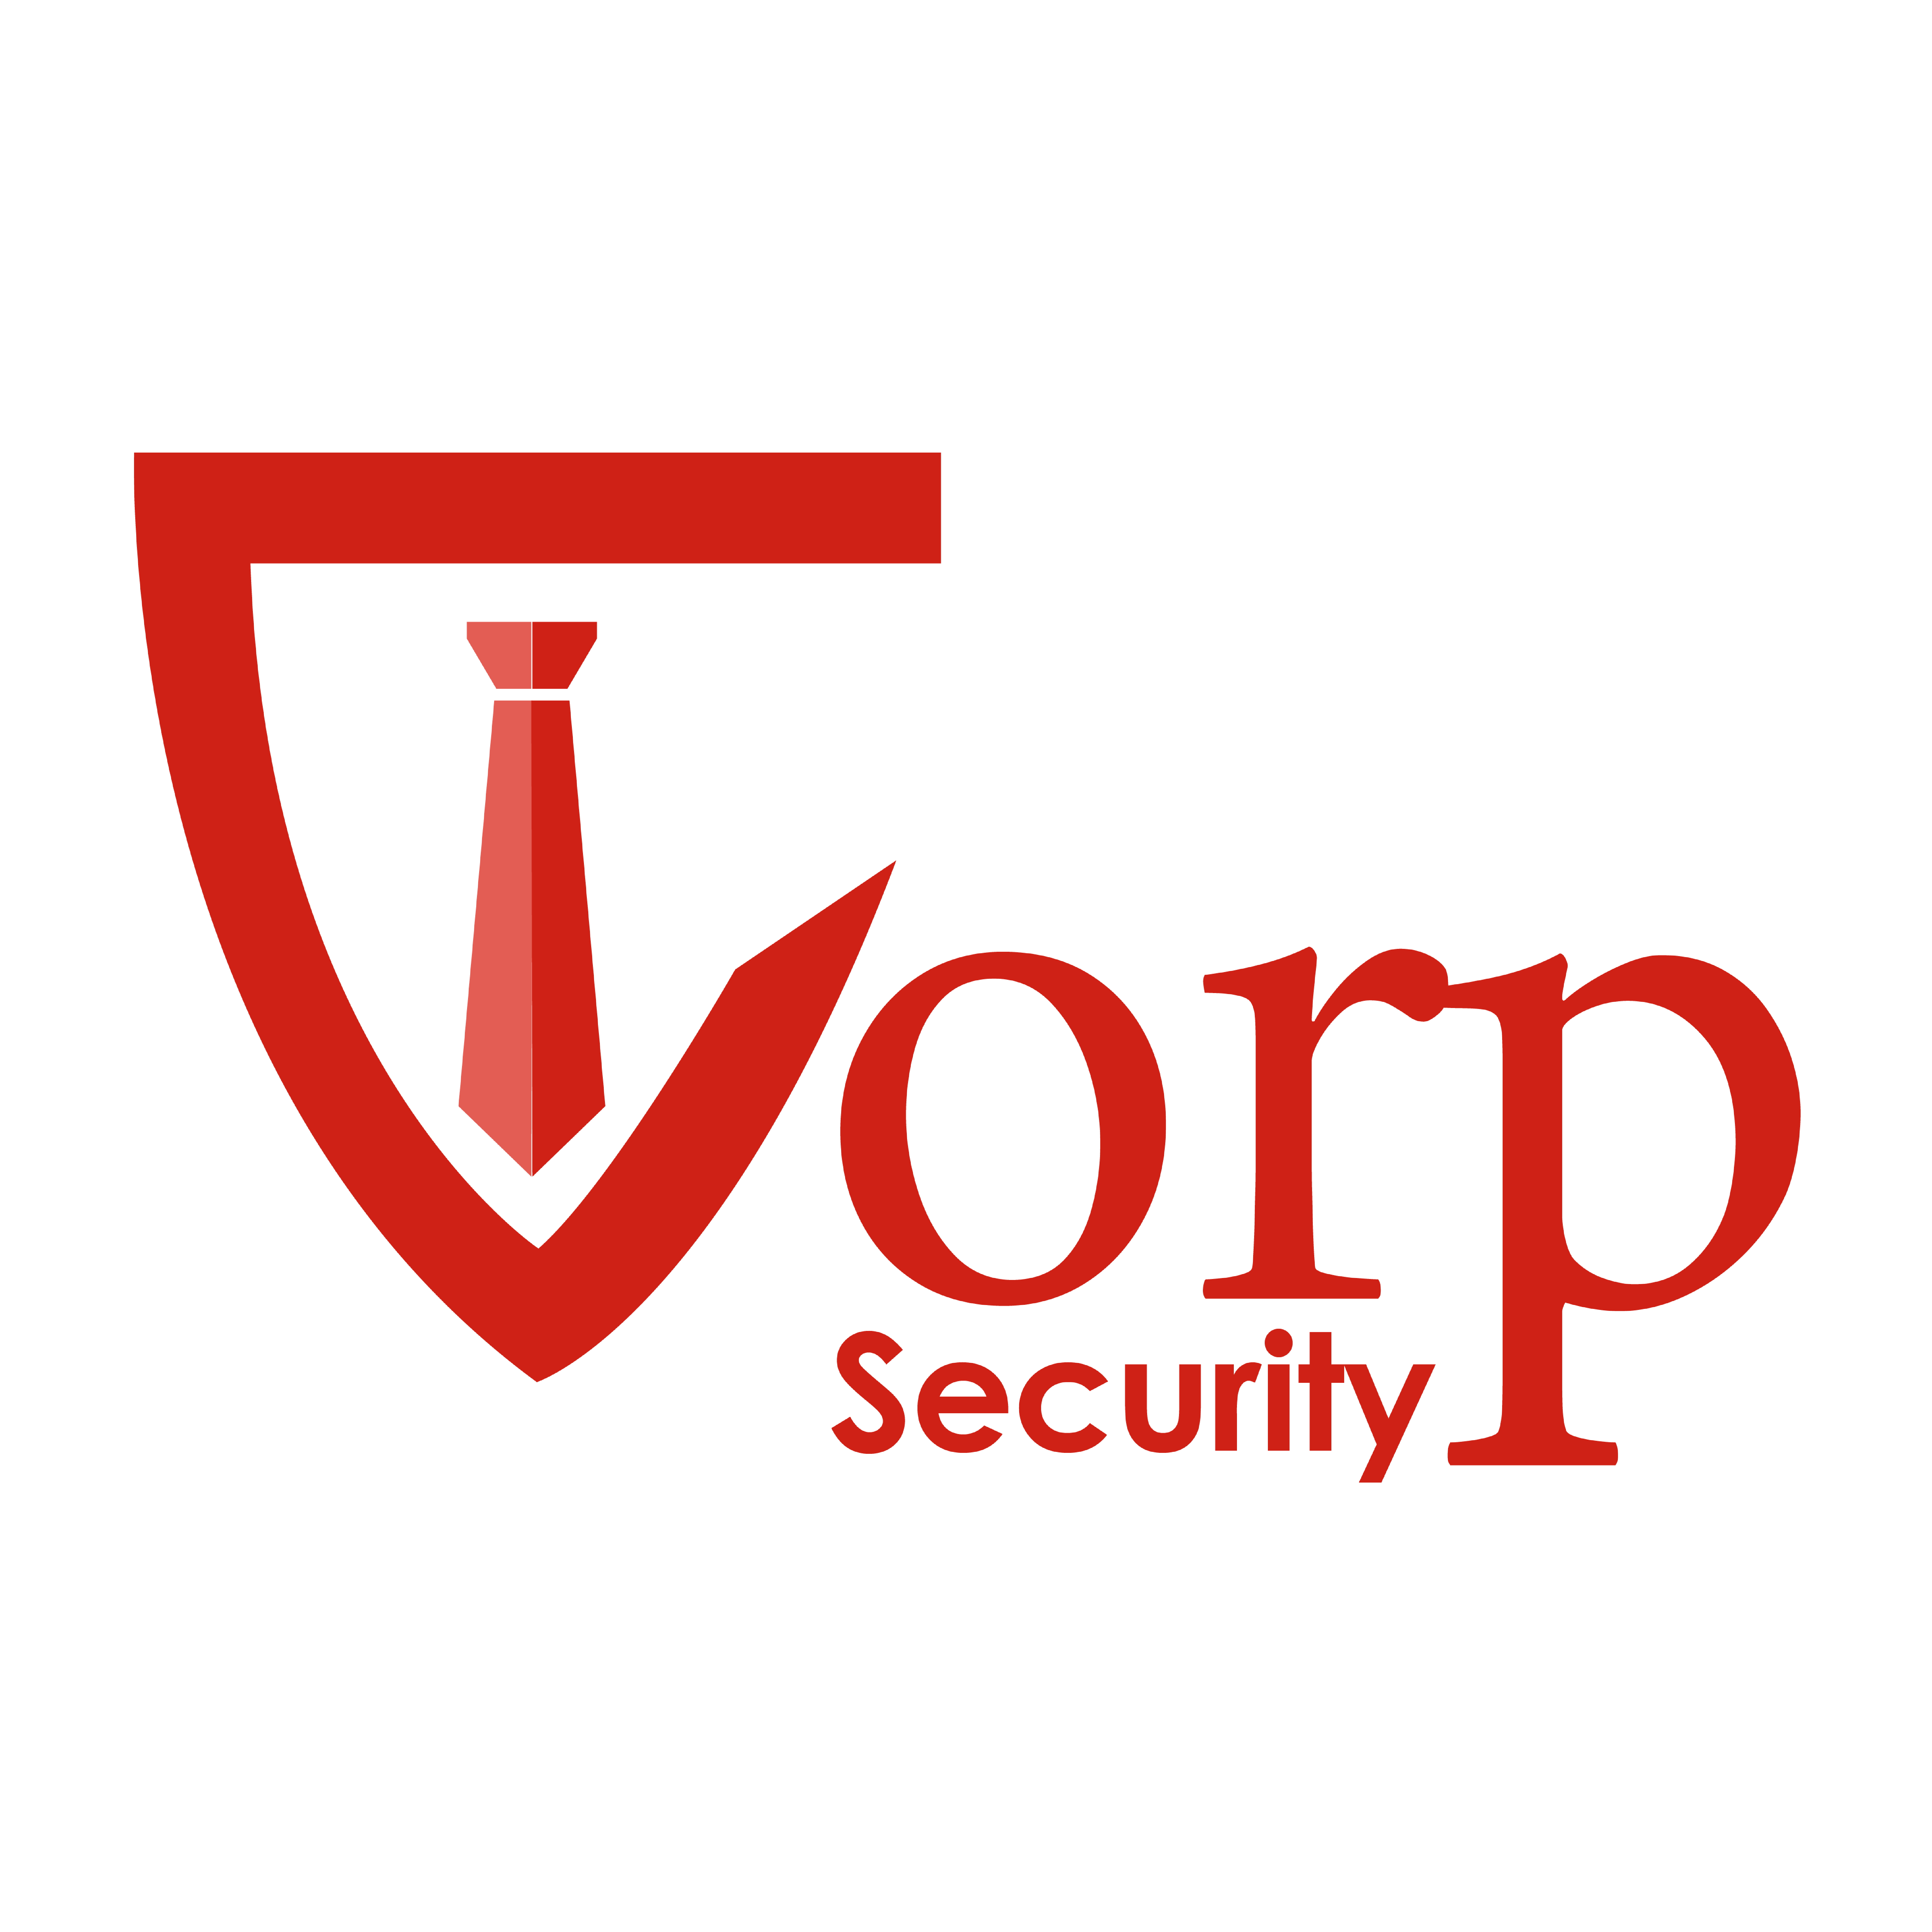 ICORP Security